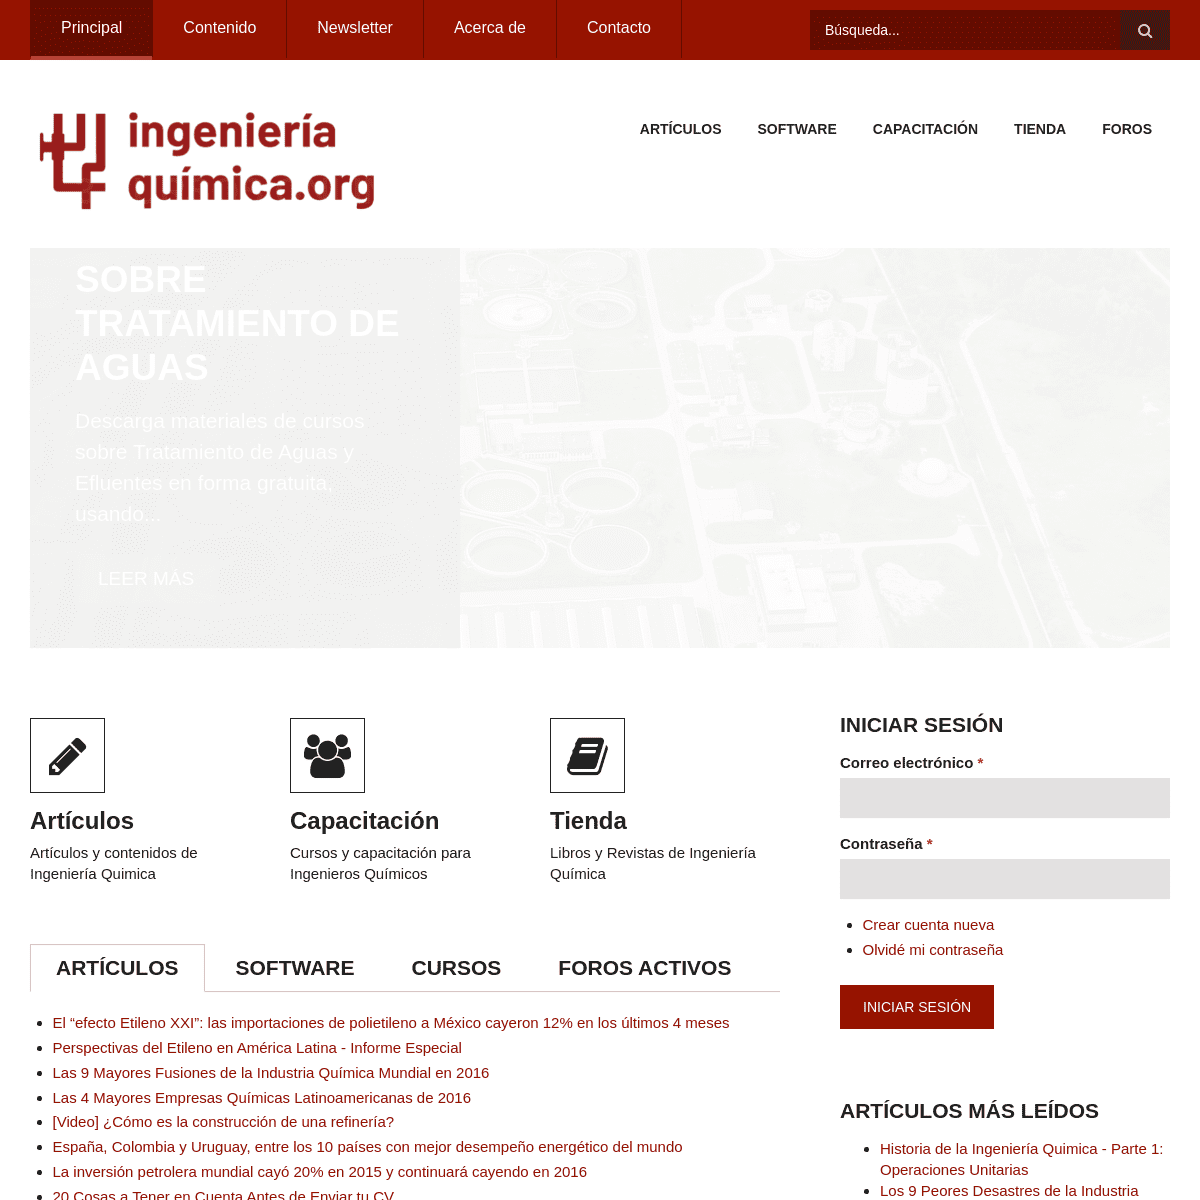 A complete backup of https://ingenieriaquimica.org